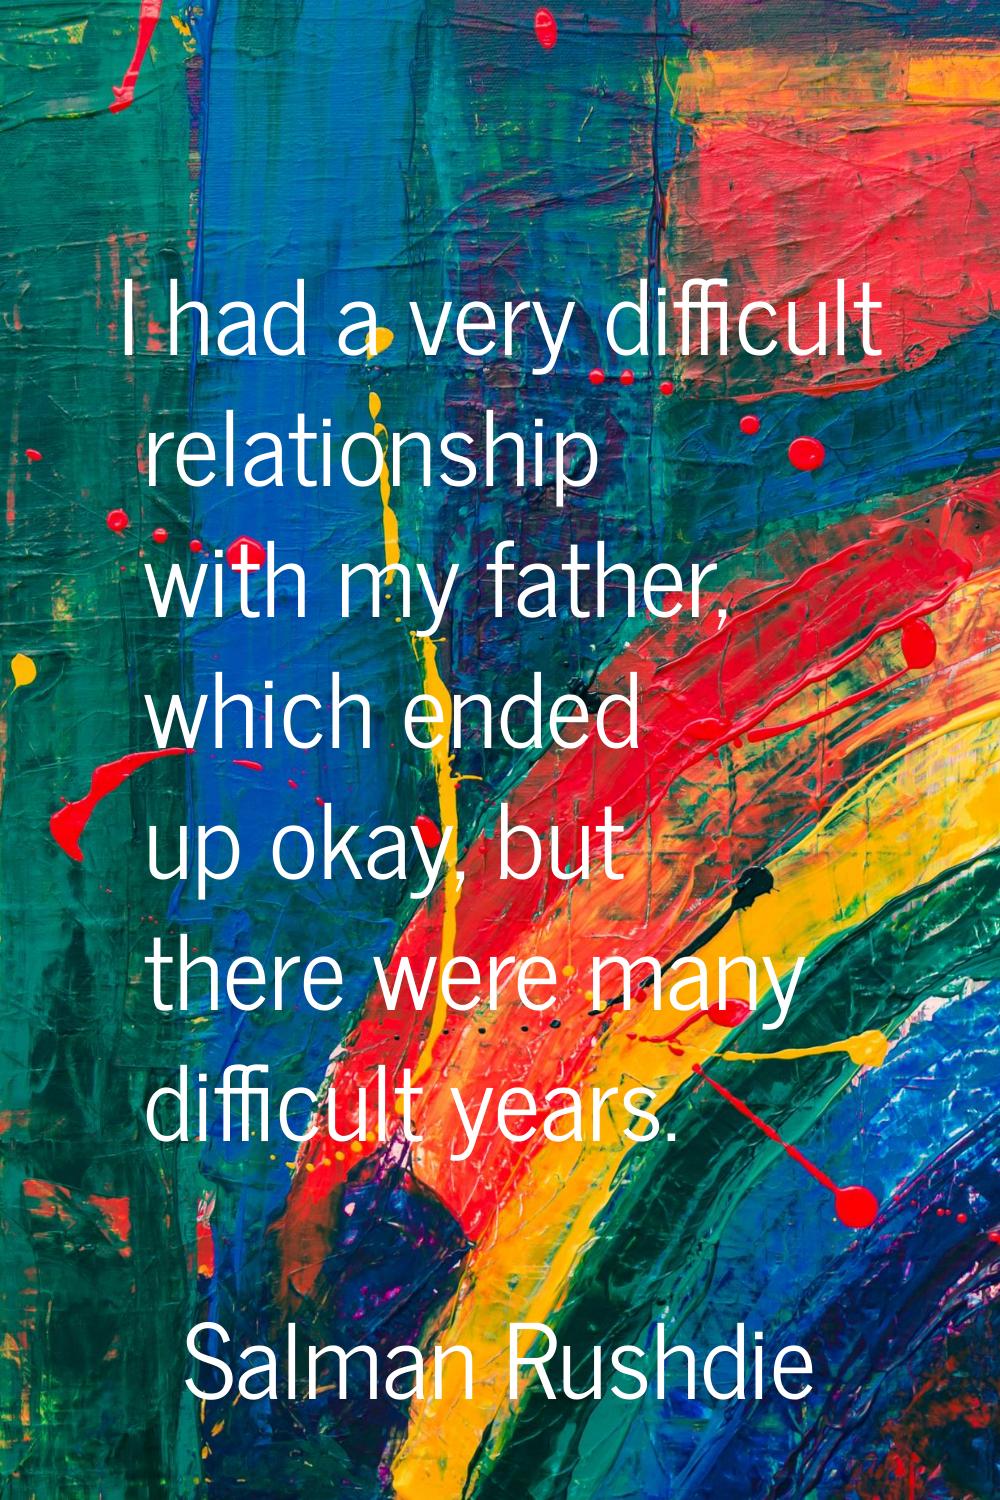 I had a very difficult relationship with my father, which ended up okay, but there were many diffic